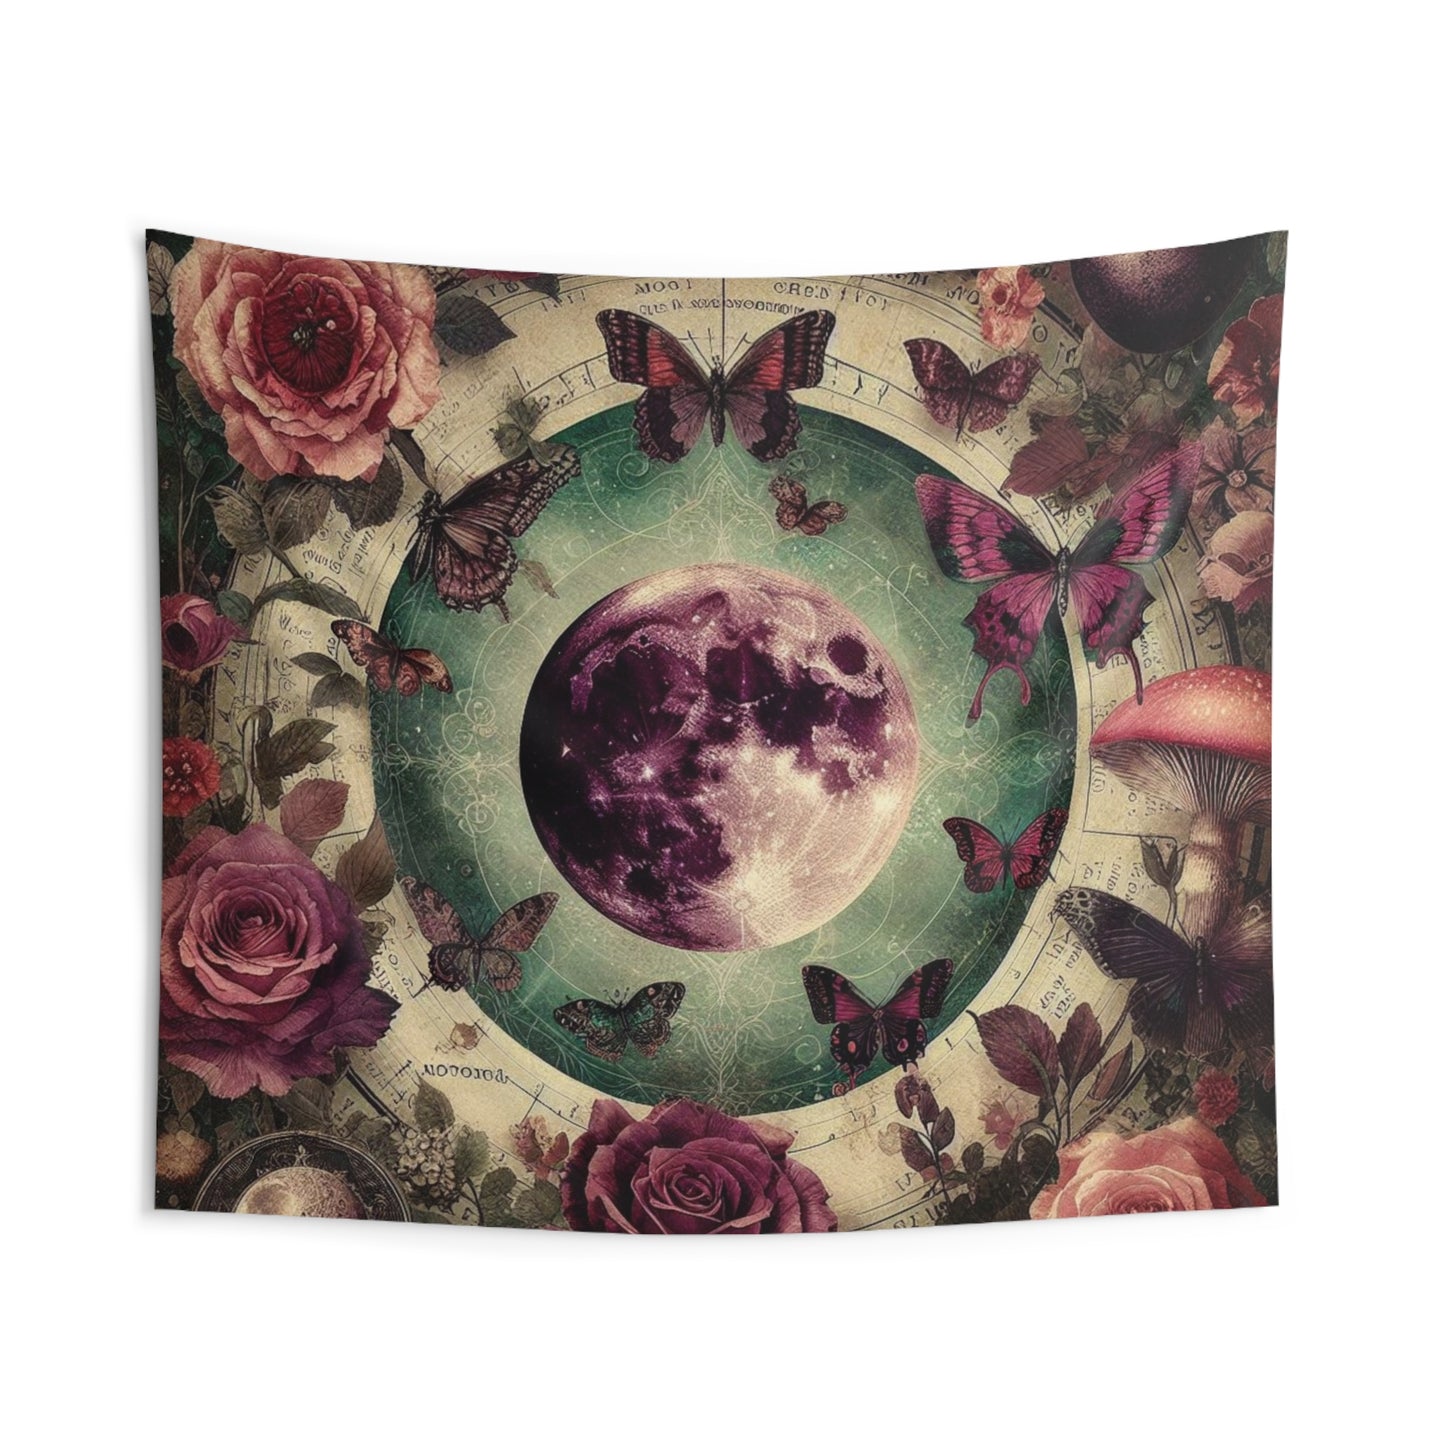 Tapestry, Large Celestial Tapestry with Whimsigoth Aesthetic, Floral Boho Tapestry for Dark Cottagecore Decor